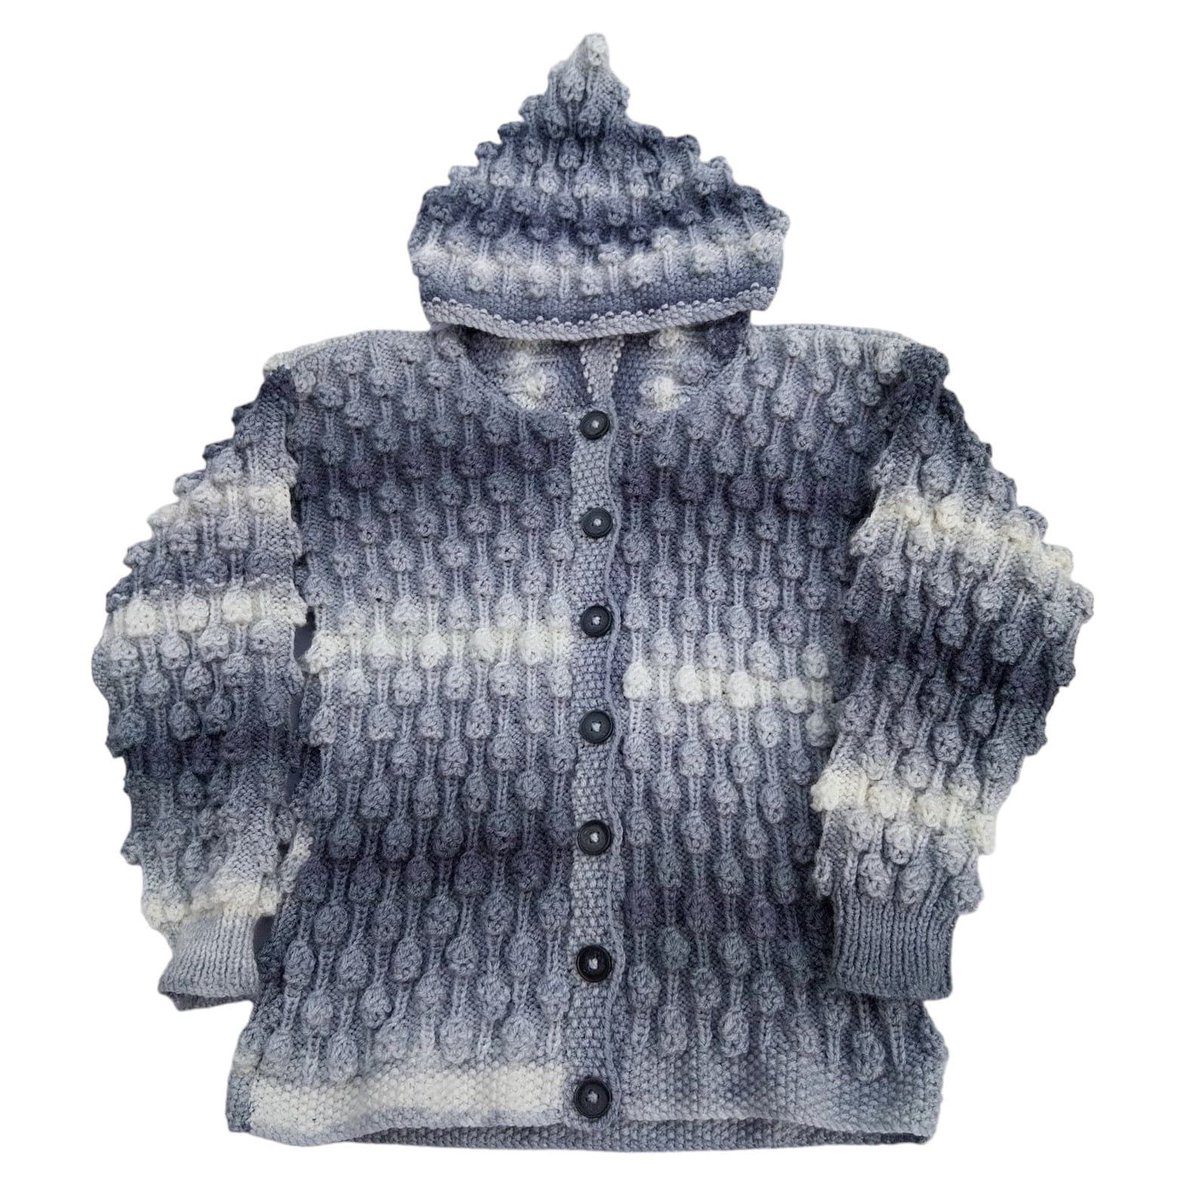 Stay warm in style with this unique, hand-knitted grey and white ombre children's hooded cardigan. Featuring a fun bobble pattern, this unisex jacket is ideal for kids aged 6-7 knittingtopia.etsy.com/listing/167959… #Etsy #knittingtopia #childrensknitwear #handknits #craftbizparty #MHHSBD